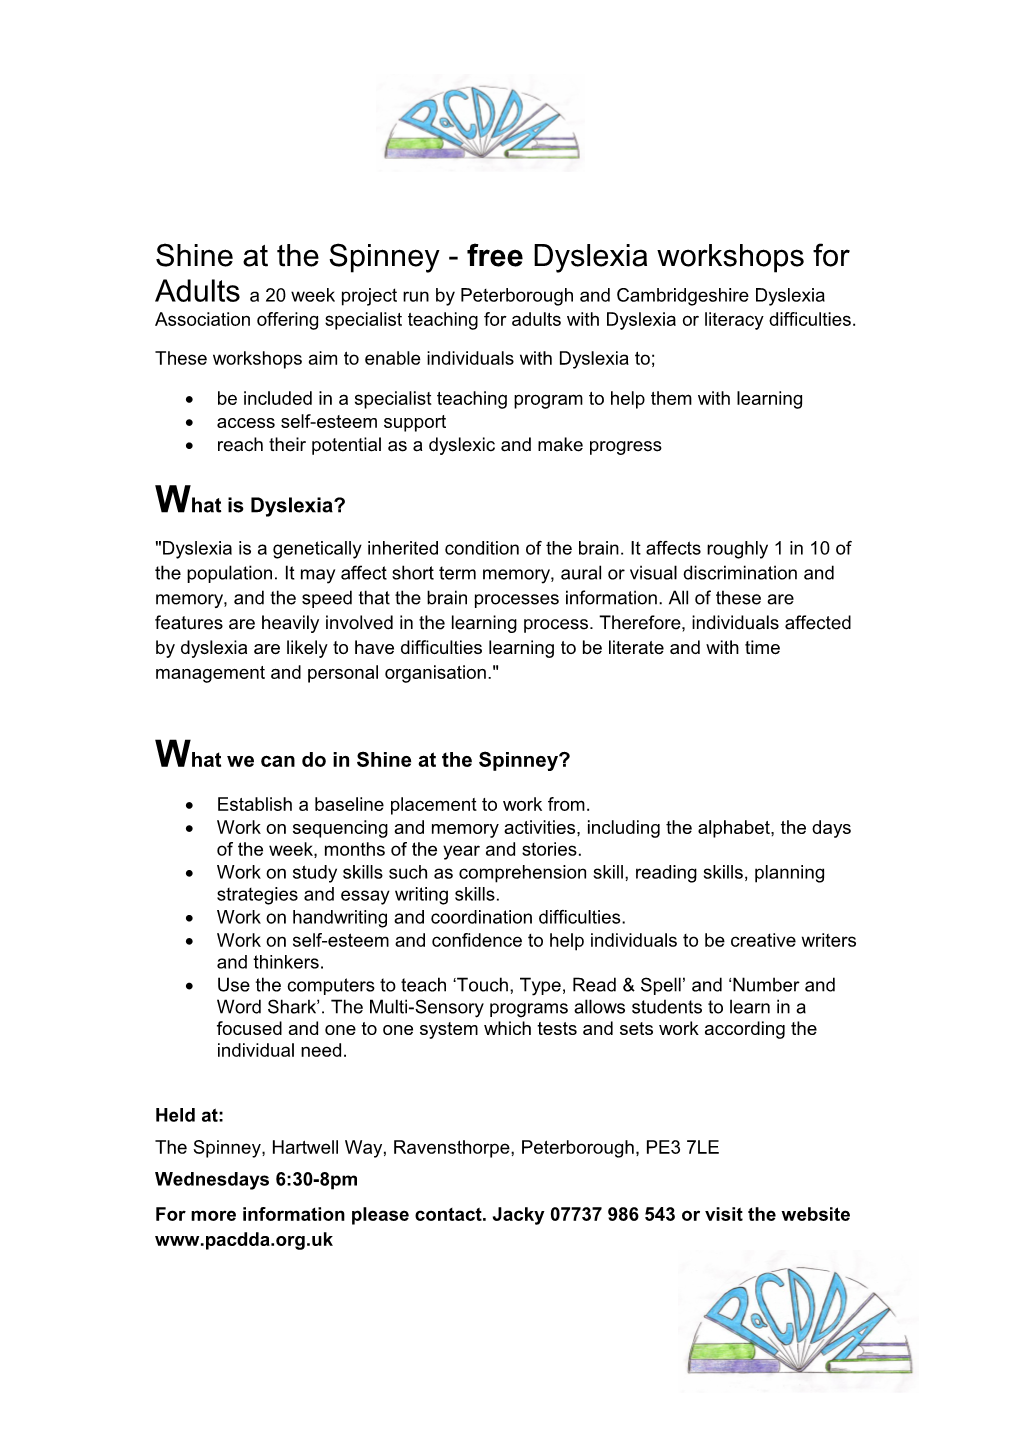 These Workshops Aim to Enable Individuals with Dyslexia To;